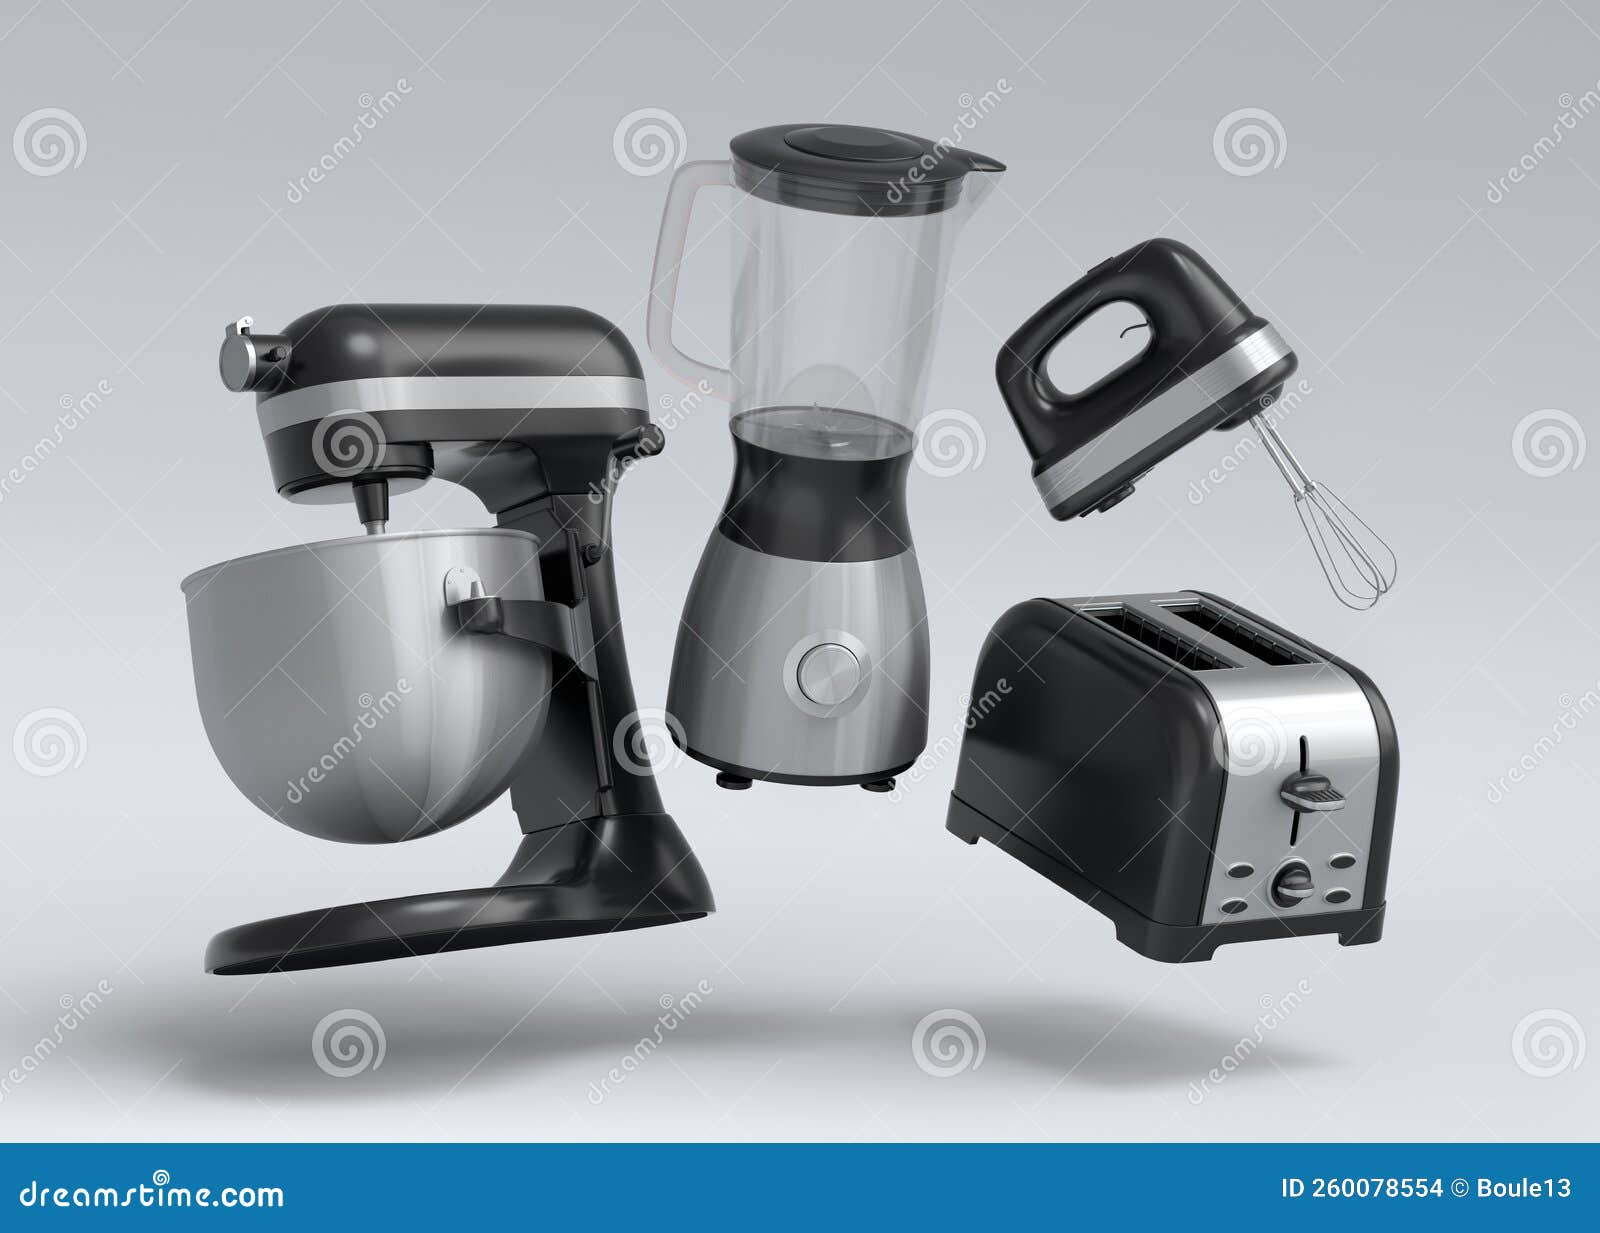 Electric kitchen appliances and utensils for making breakfast on